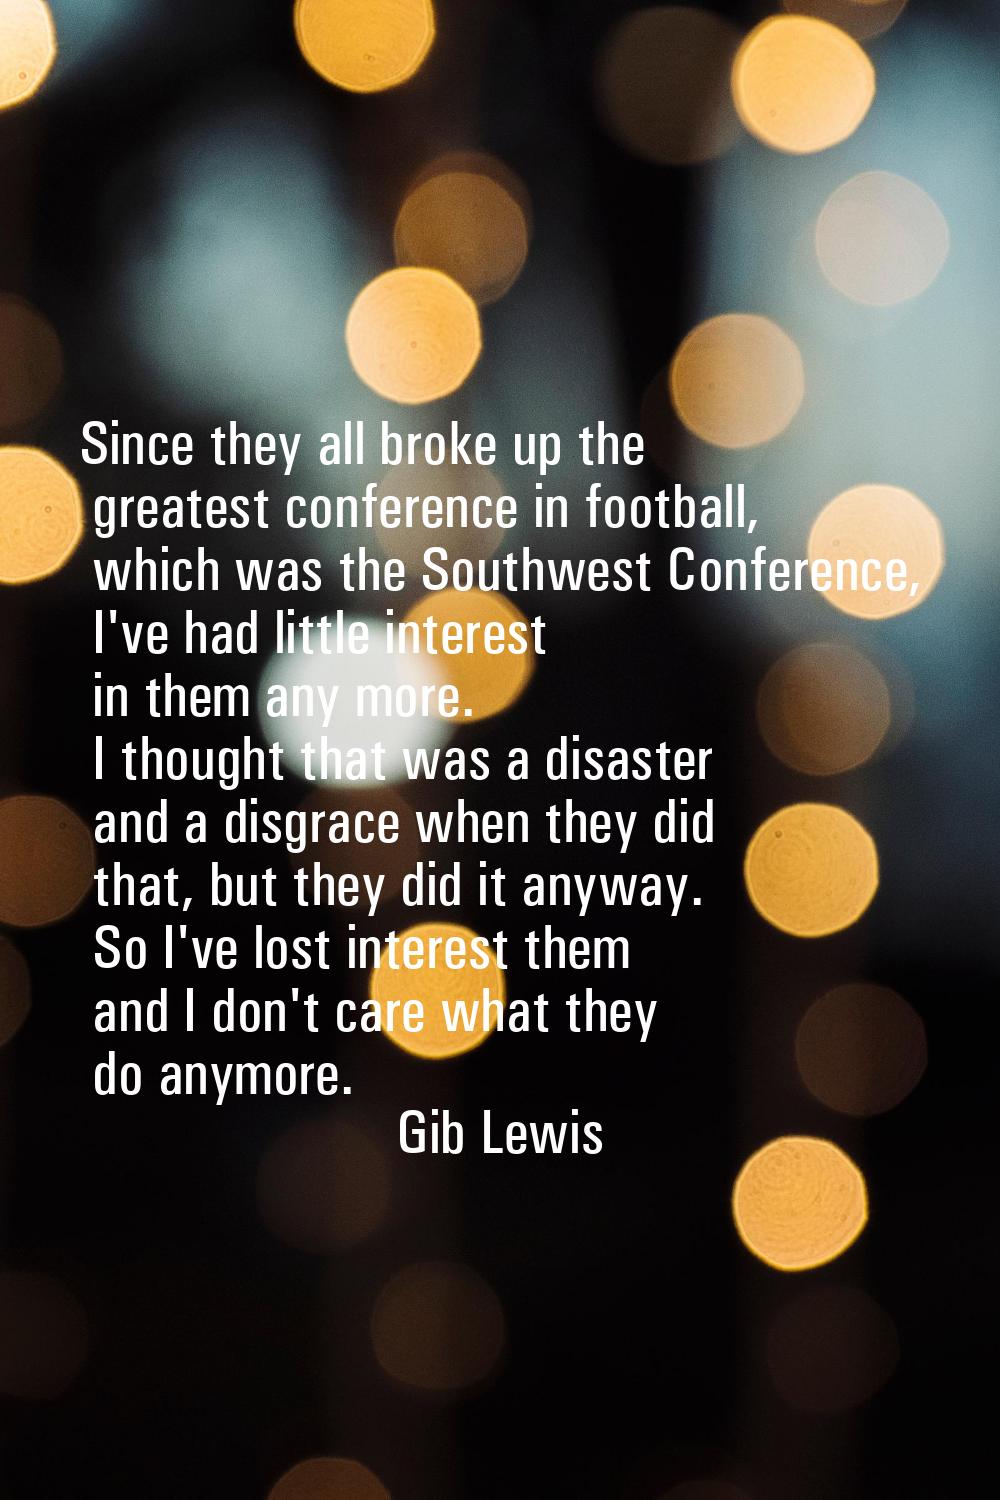 Since they all broke up the greatest conference in football, which was the Southwest Conference, I'